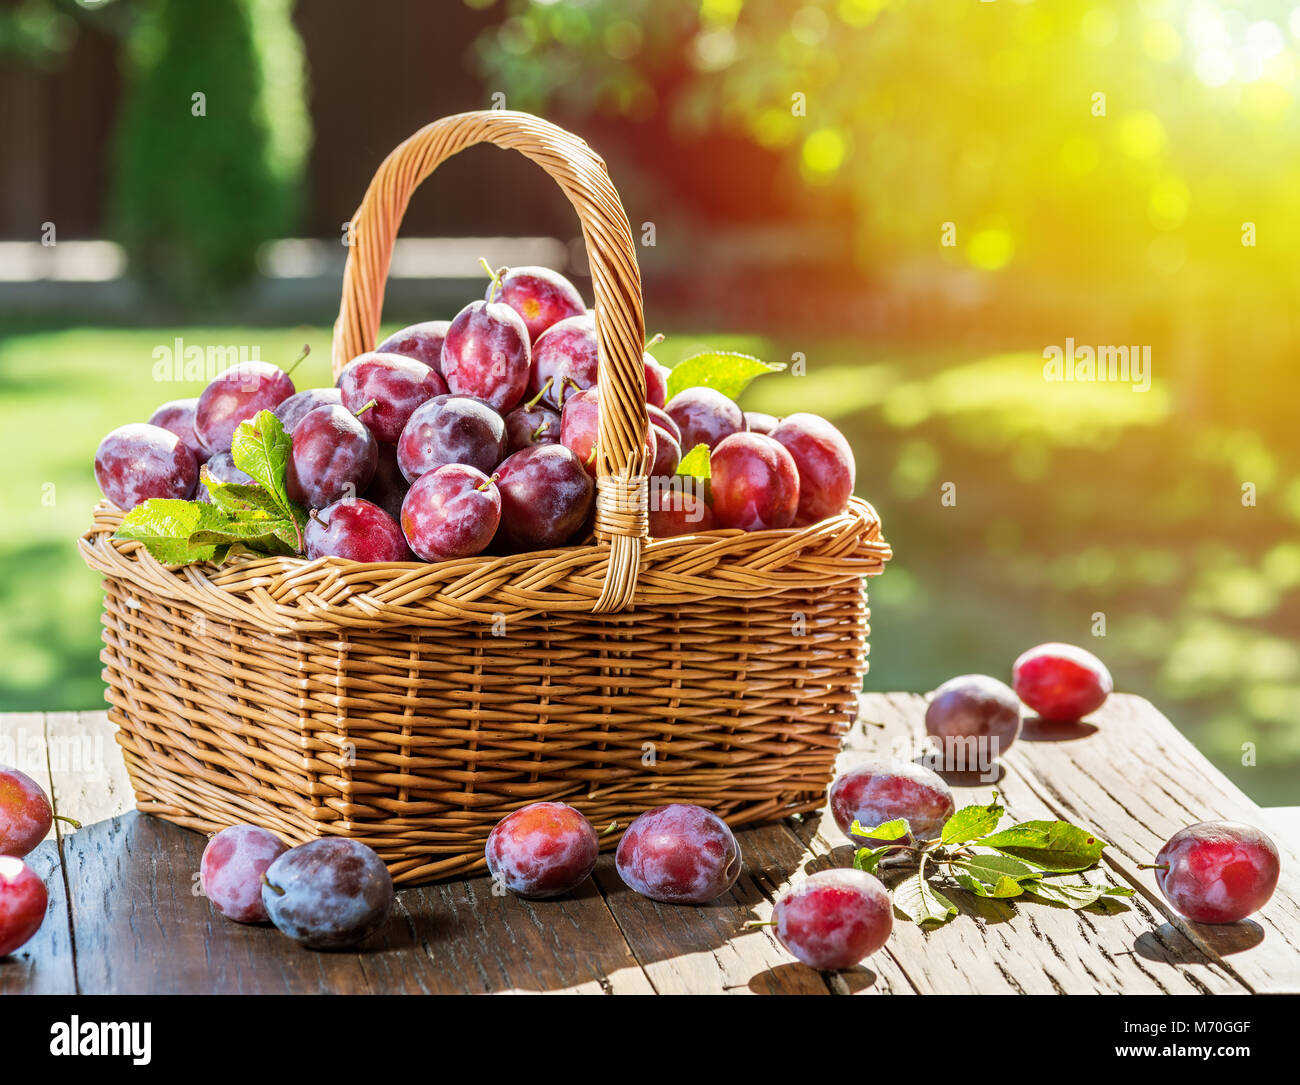 Plum harvest. Ripe plums in the basket on the table. Garden at the background. Stock Photo